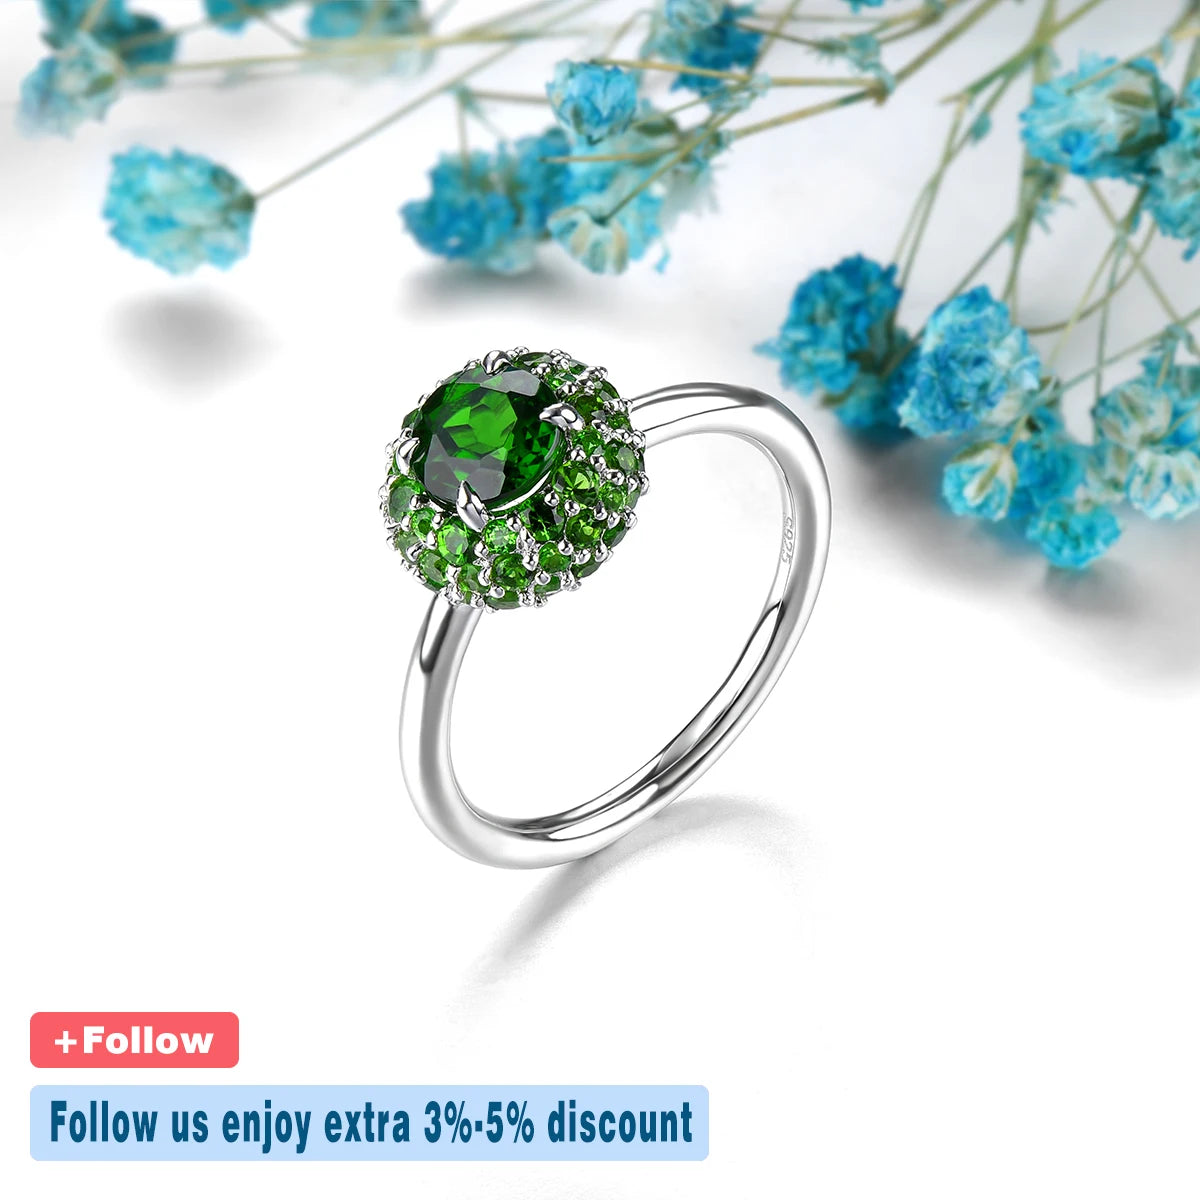 Natural Chrome Diopside Solid Sterling Silver Rings 1.7 Carats Women Elegant Style Unique Original Design S925 Jewelry Gifts